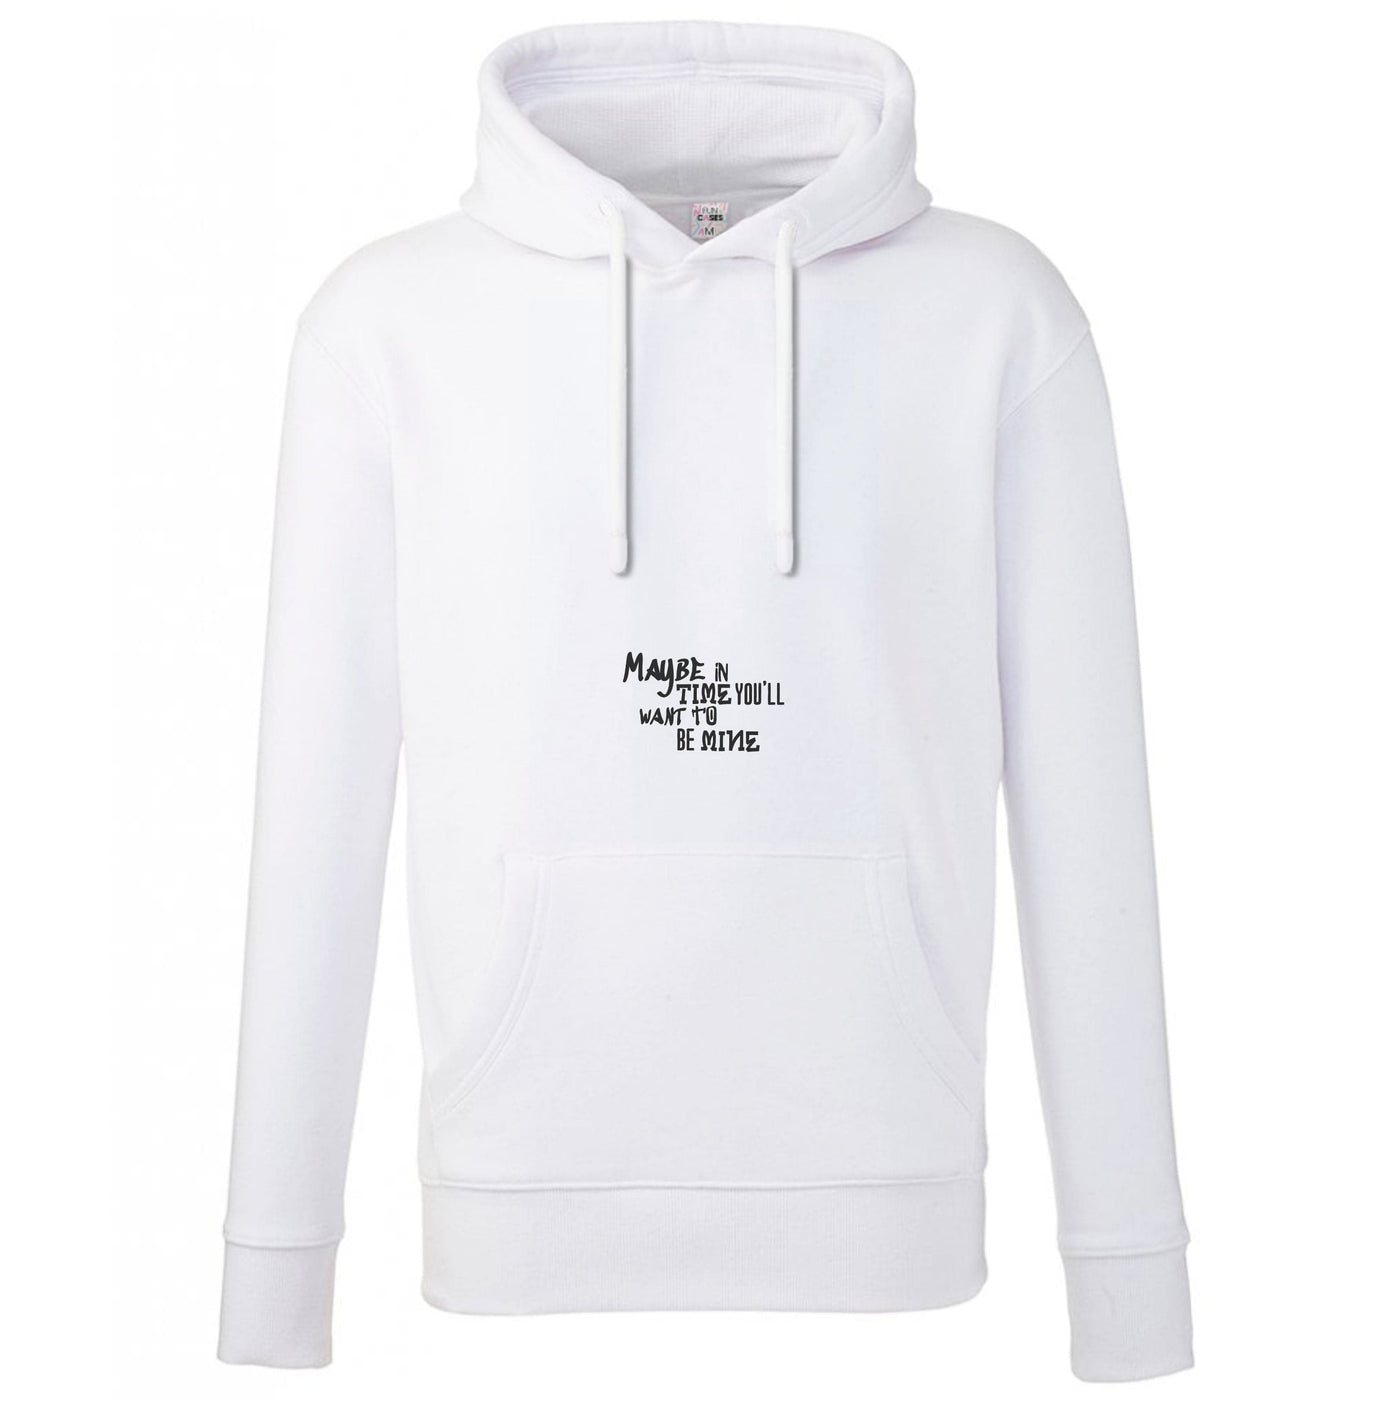 Maybe In Time - Gorillaz Hoodie